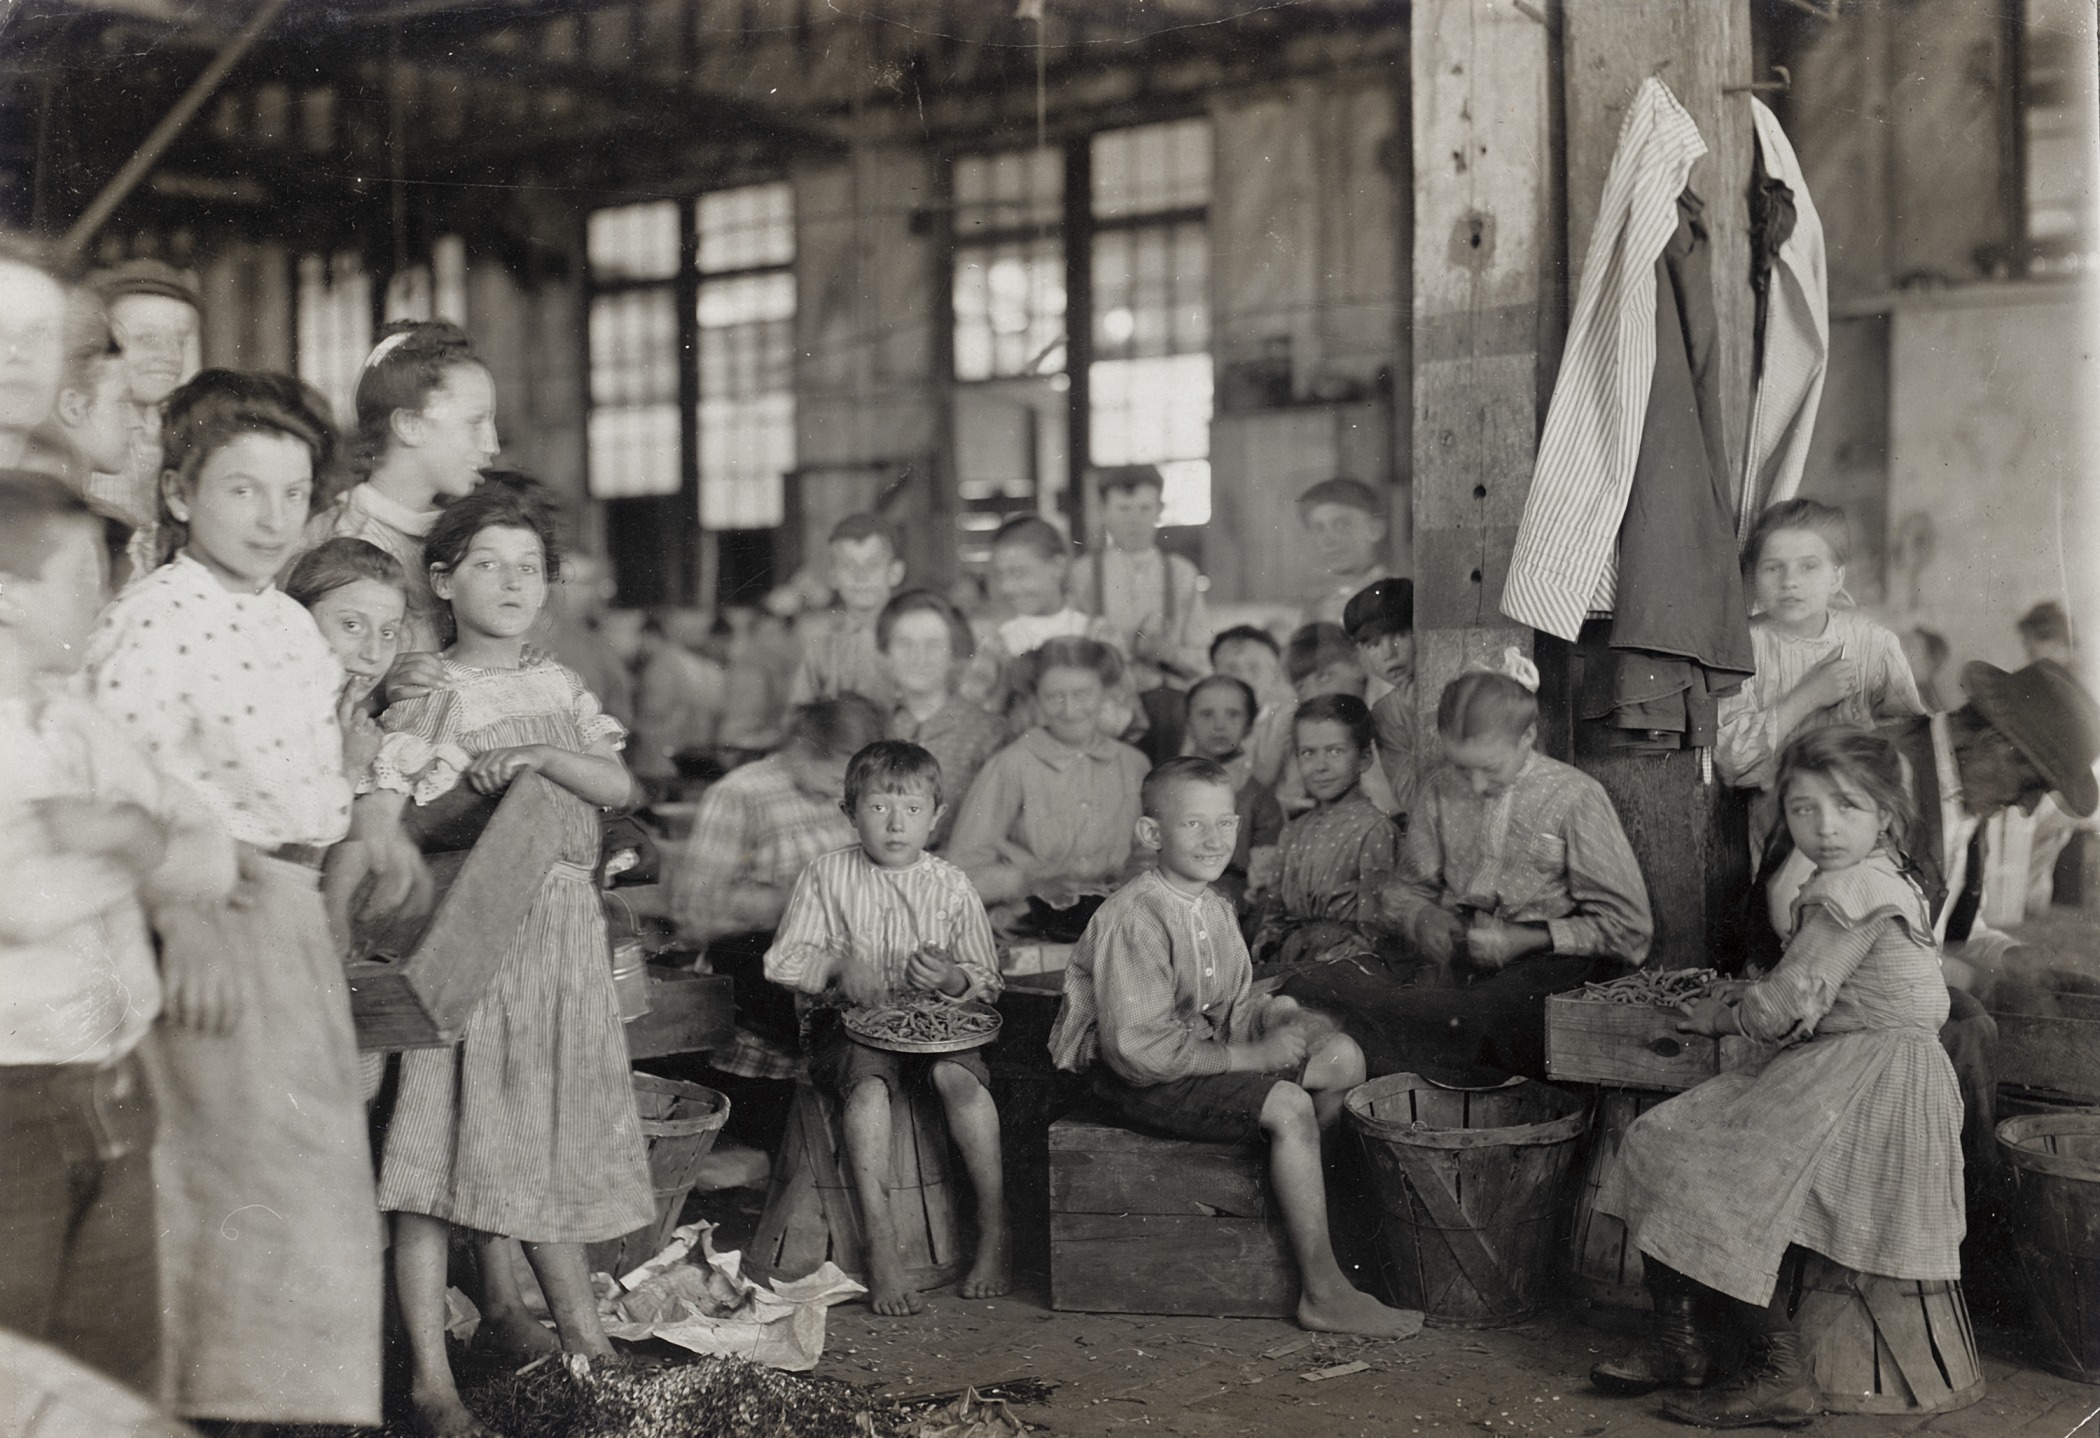 Child Labor in Baltimore, Maryland, 1909 - Girl Museum